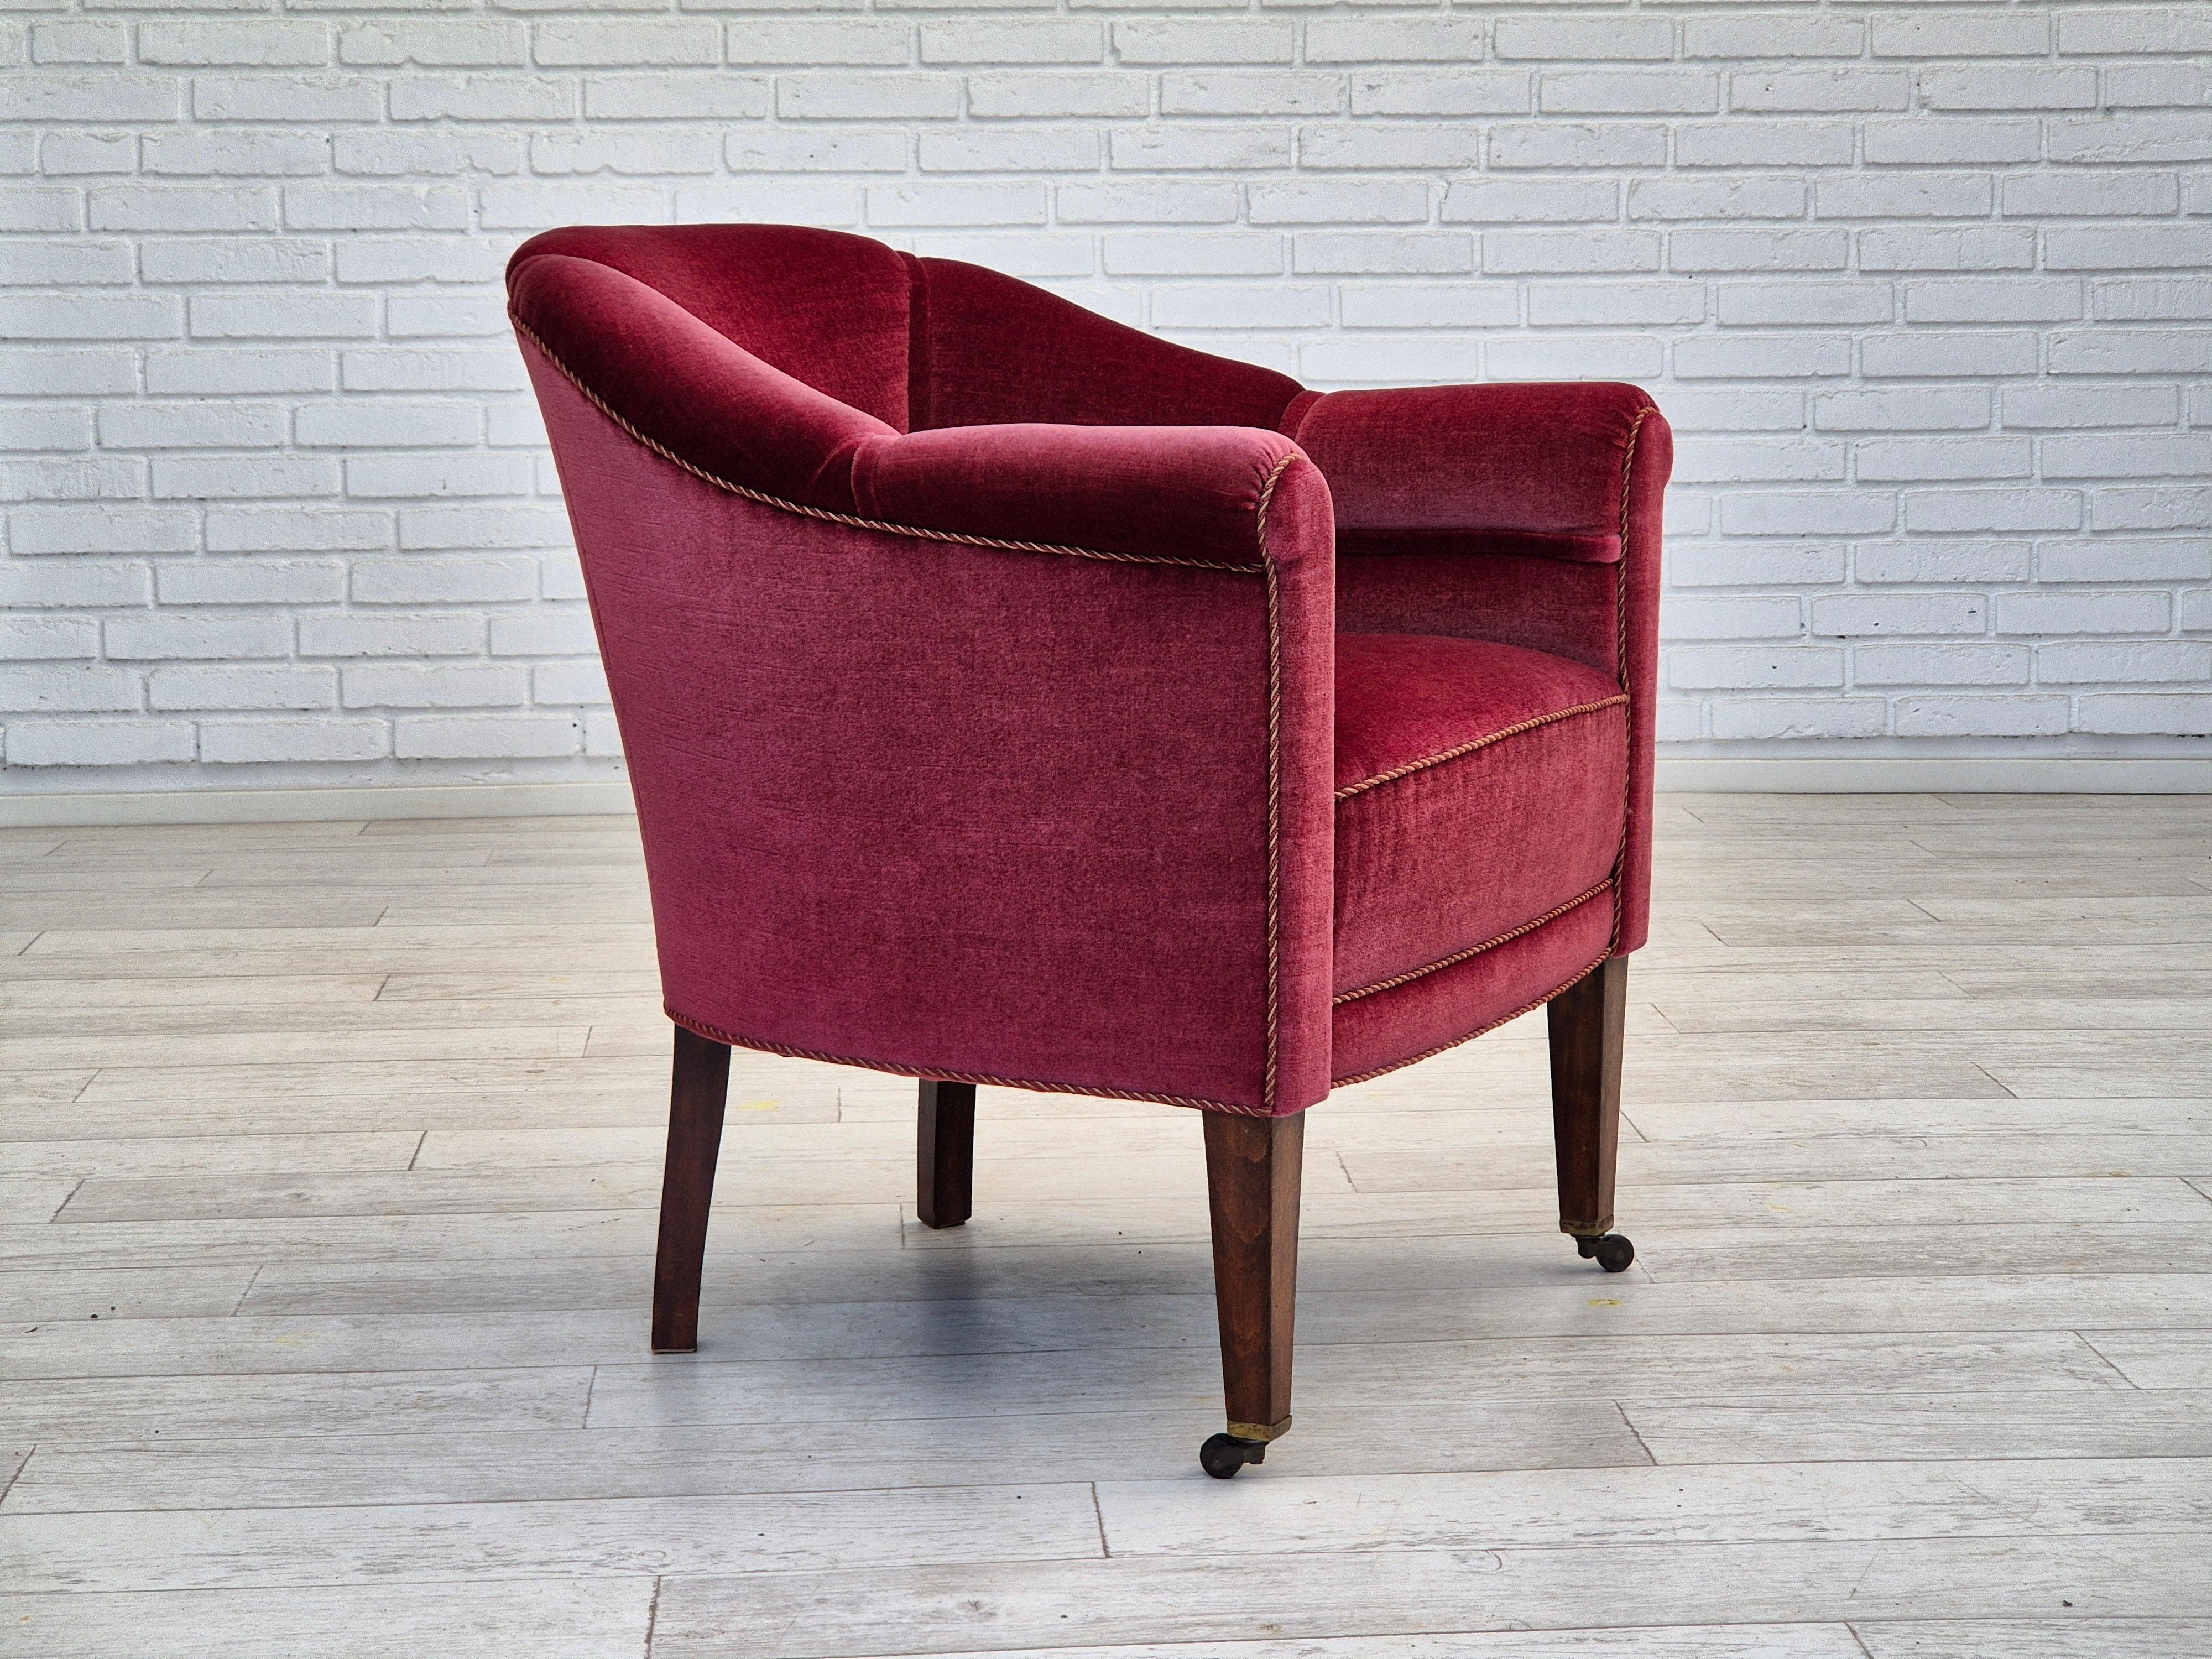 1950s, Danish lounge chair in original very good condition: no smells and no stains. Red furniture velour, ash wood legs with brass wheels on the front legs. Springs in the seat. Manufactured by Danish furniture manufacturer in about 1950-55s.